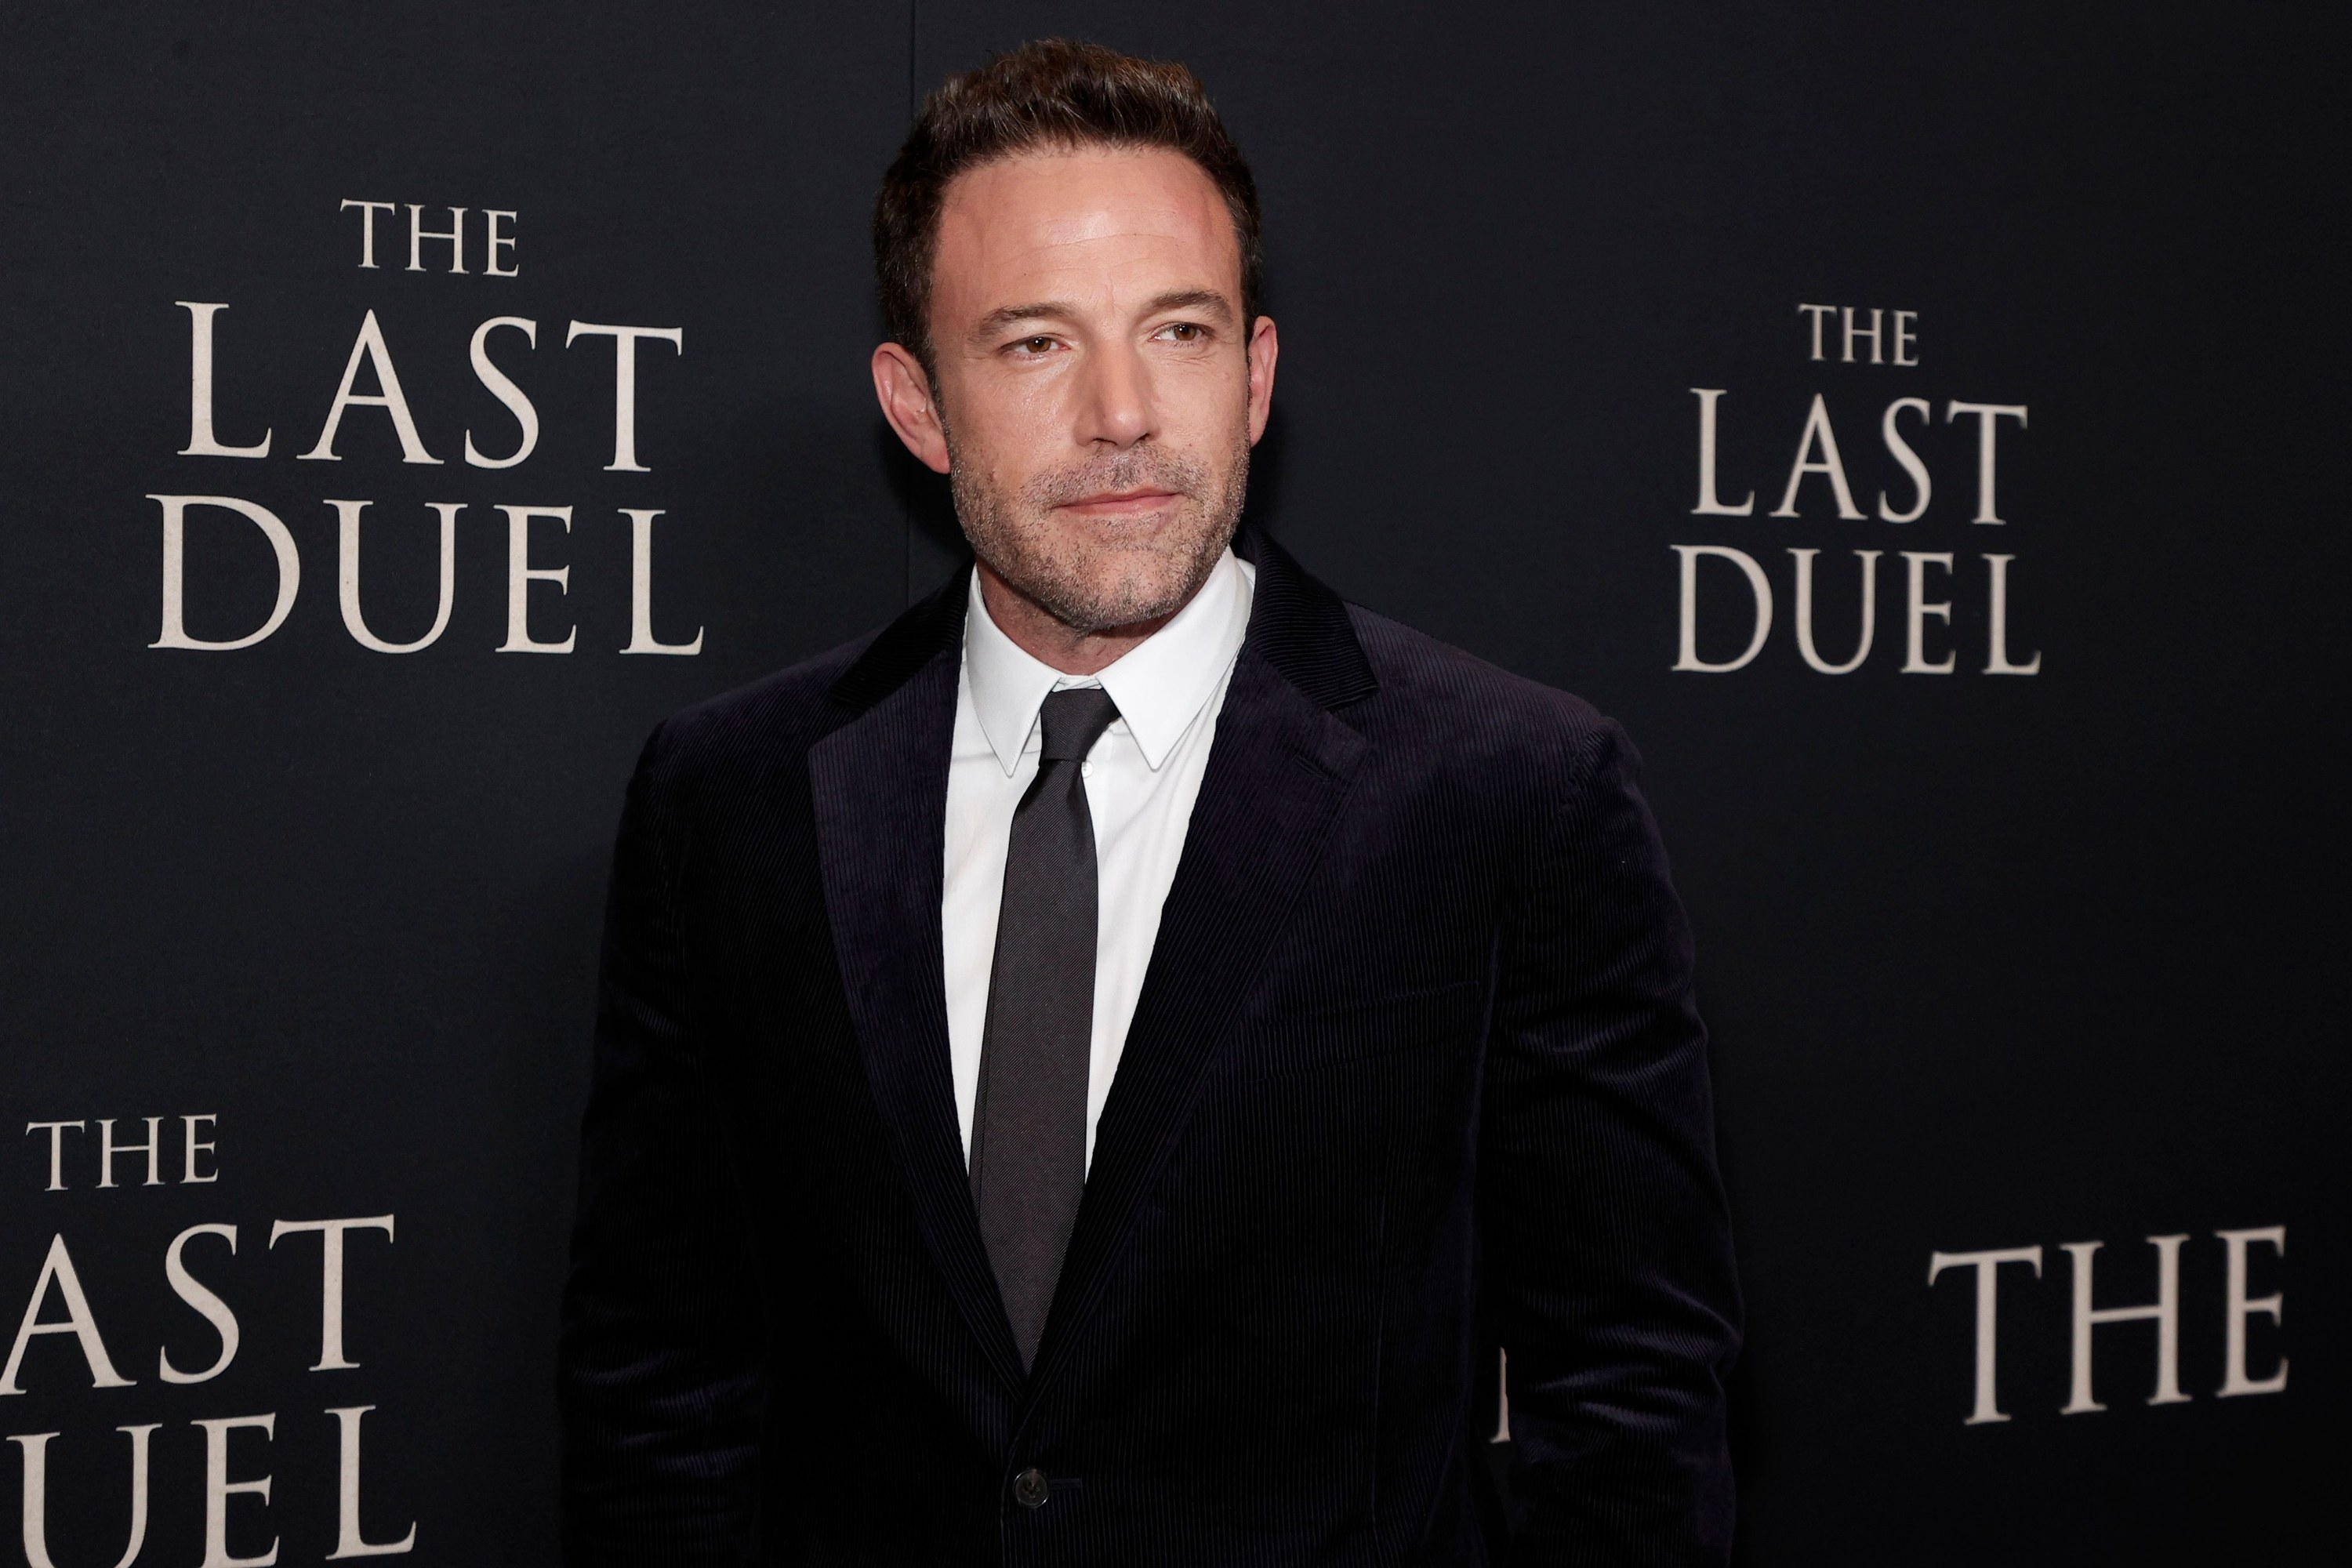 Photo of Ben Affleck in a black suit at the Last Duel premiere